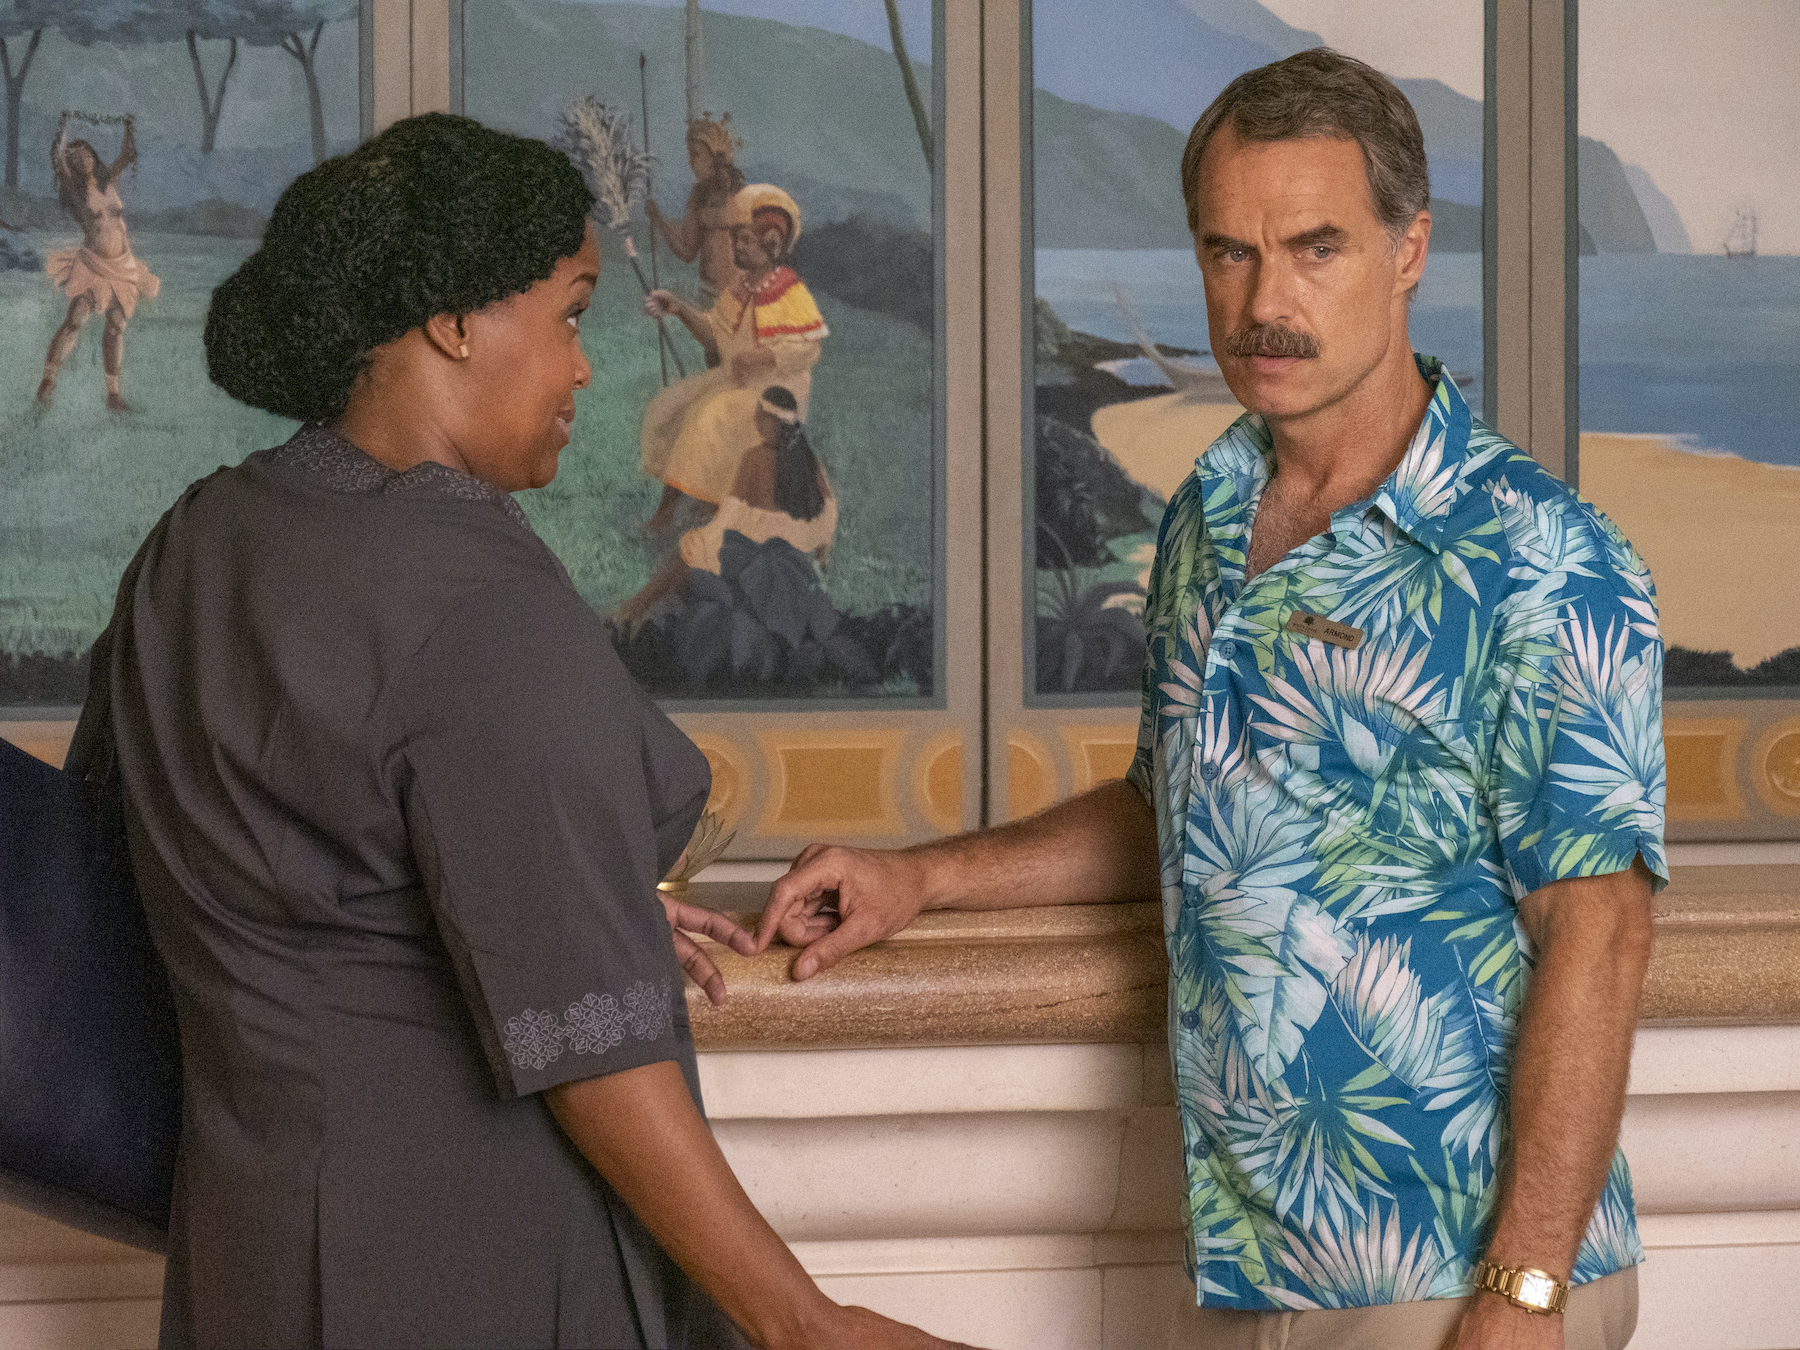 Natasha Rothwell, Murray Bartlett appear at the lobby desk as their characters in 'The White Lotus'